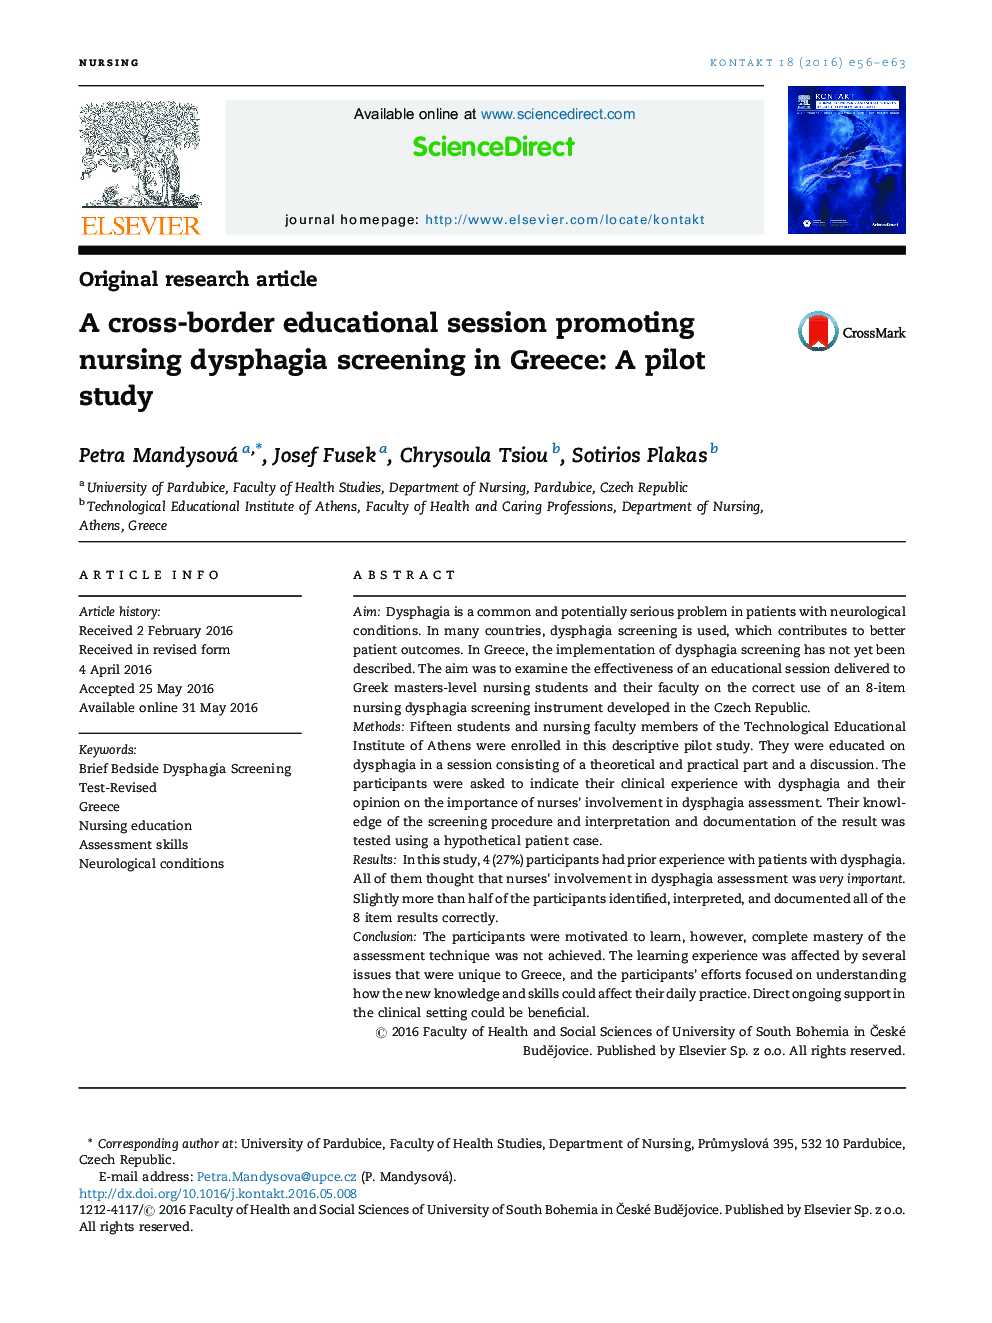 A cross-border educational session promoting nursing dysphagia screening in Greece: A pilot study